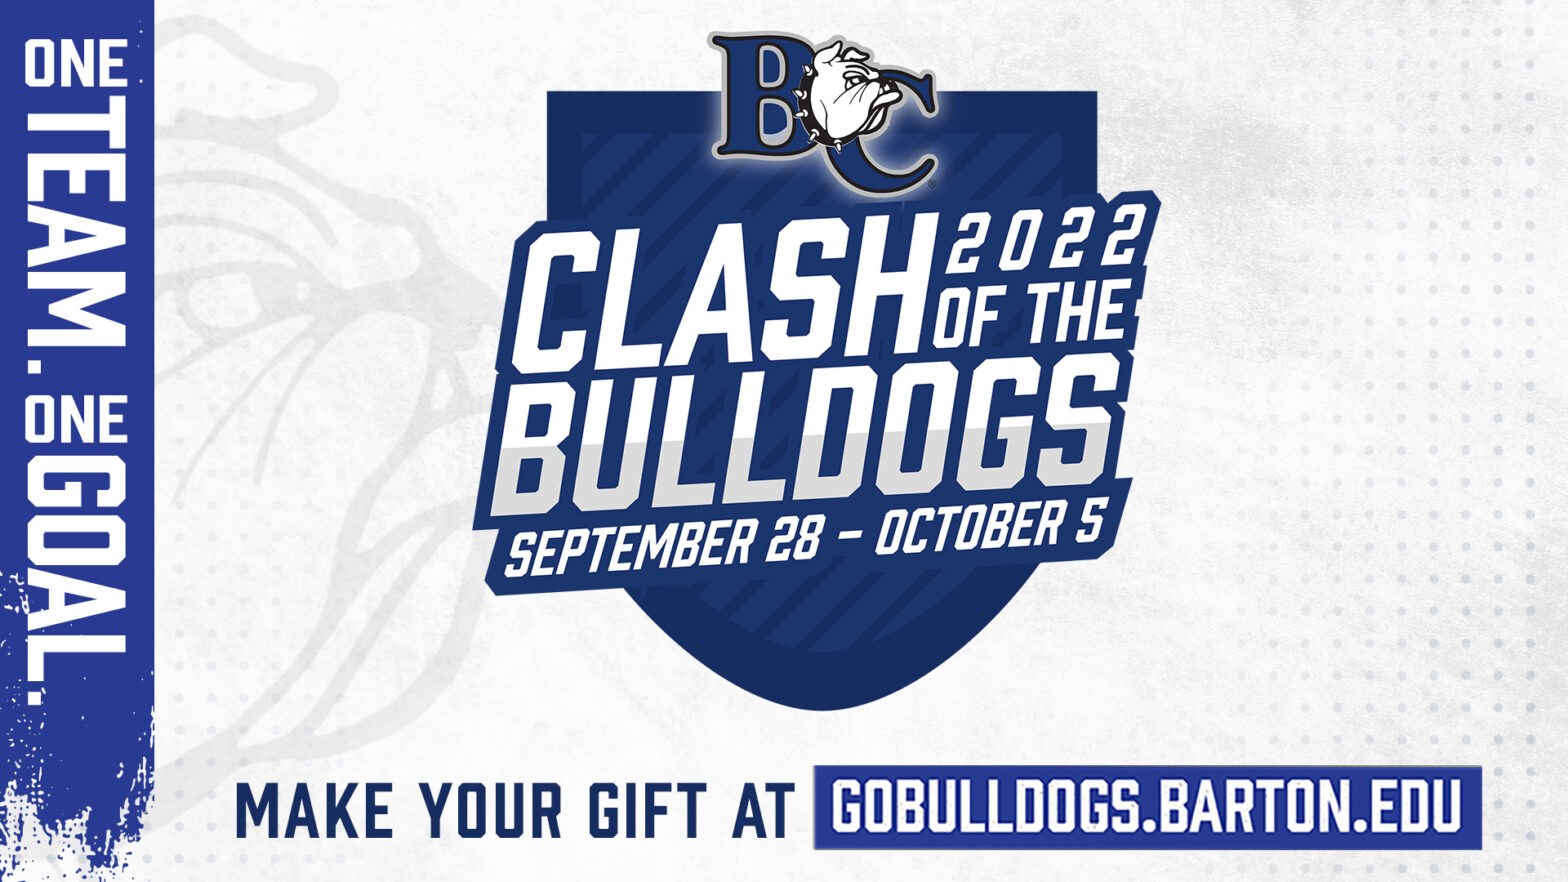 Featured image for post: Clash of the Bulldogs Giving Week Sept. 28 – Oct. 5